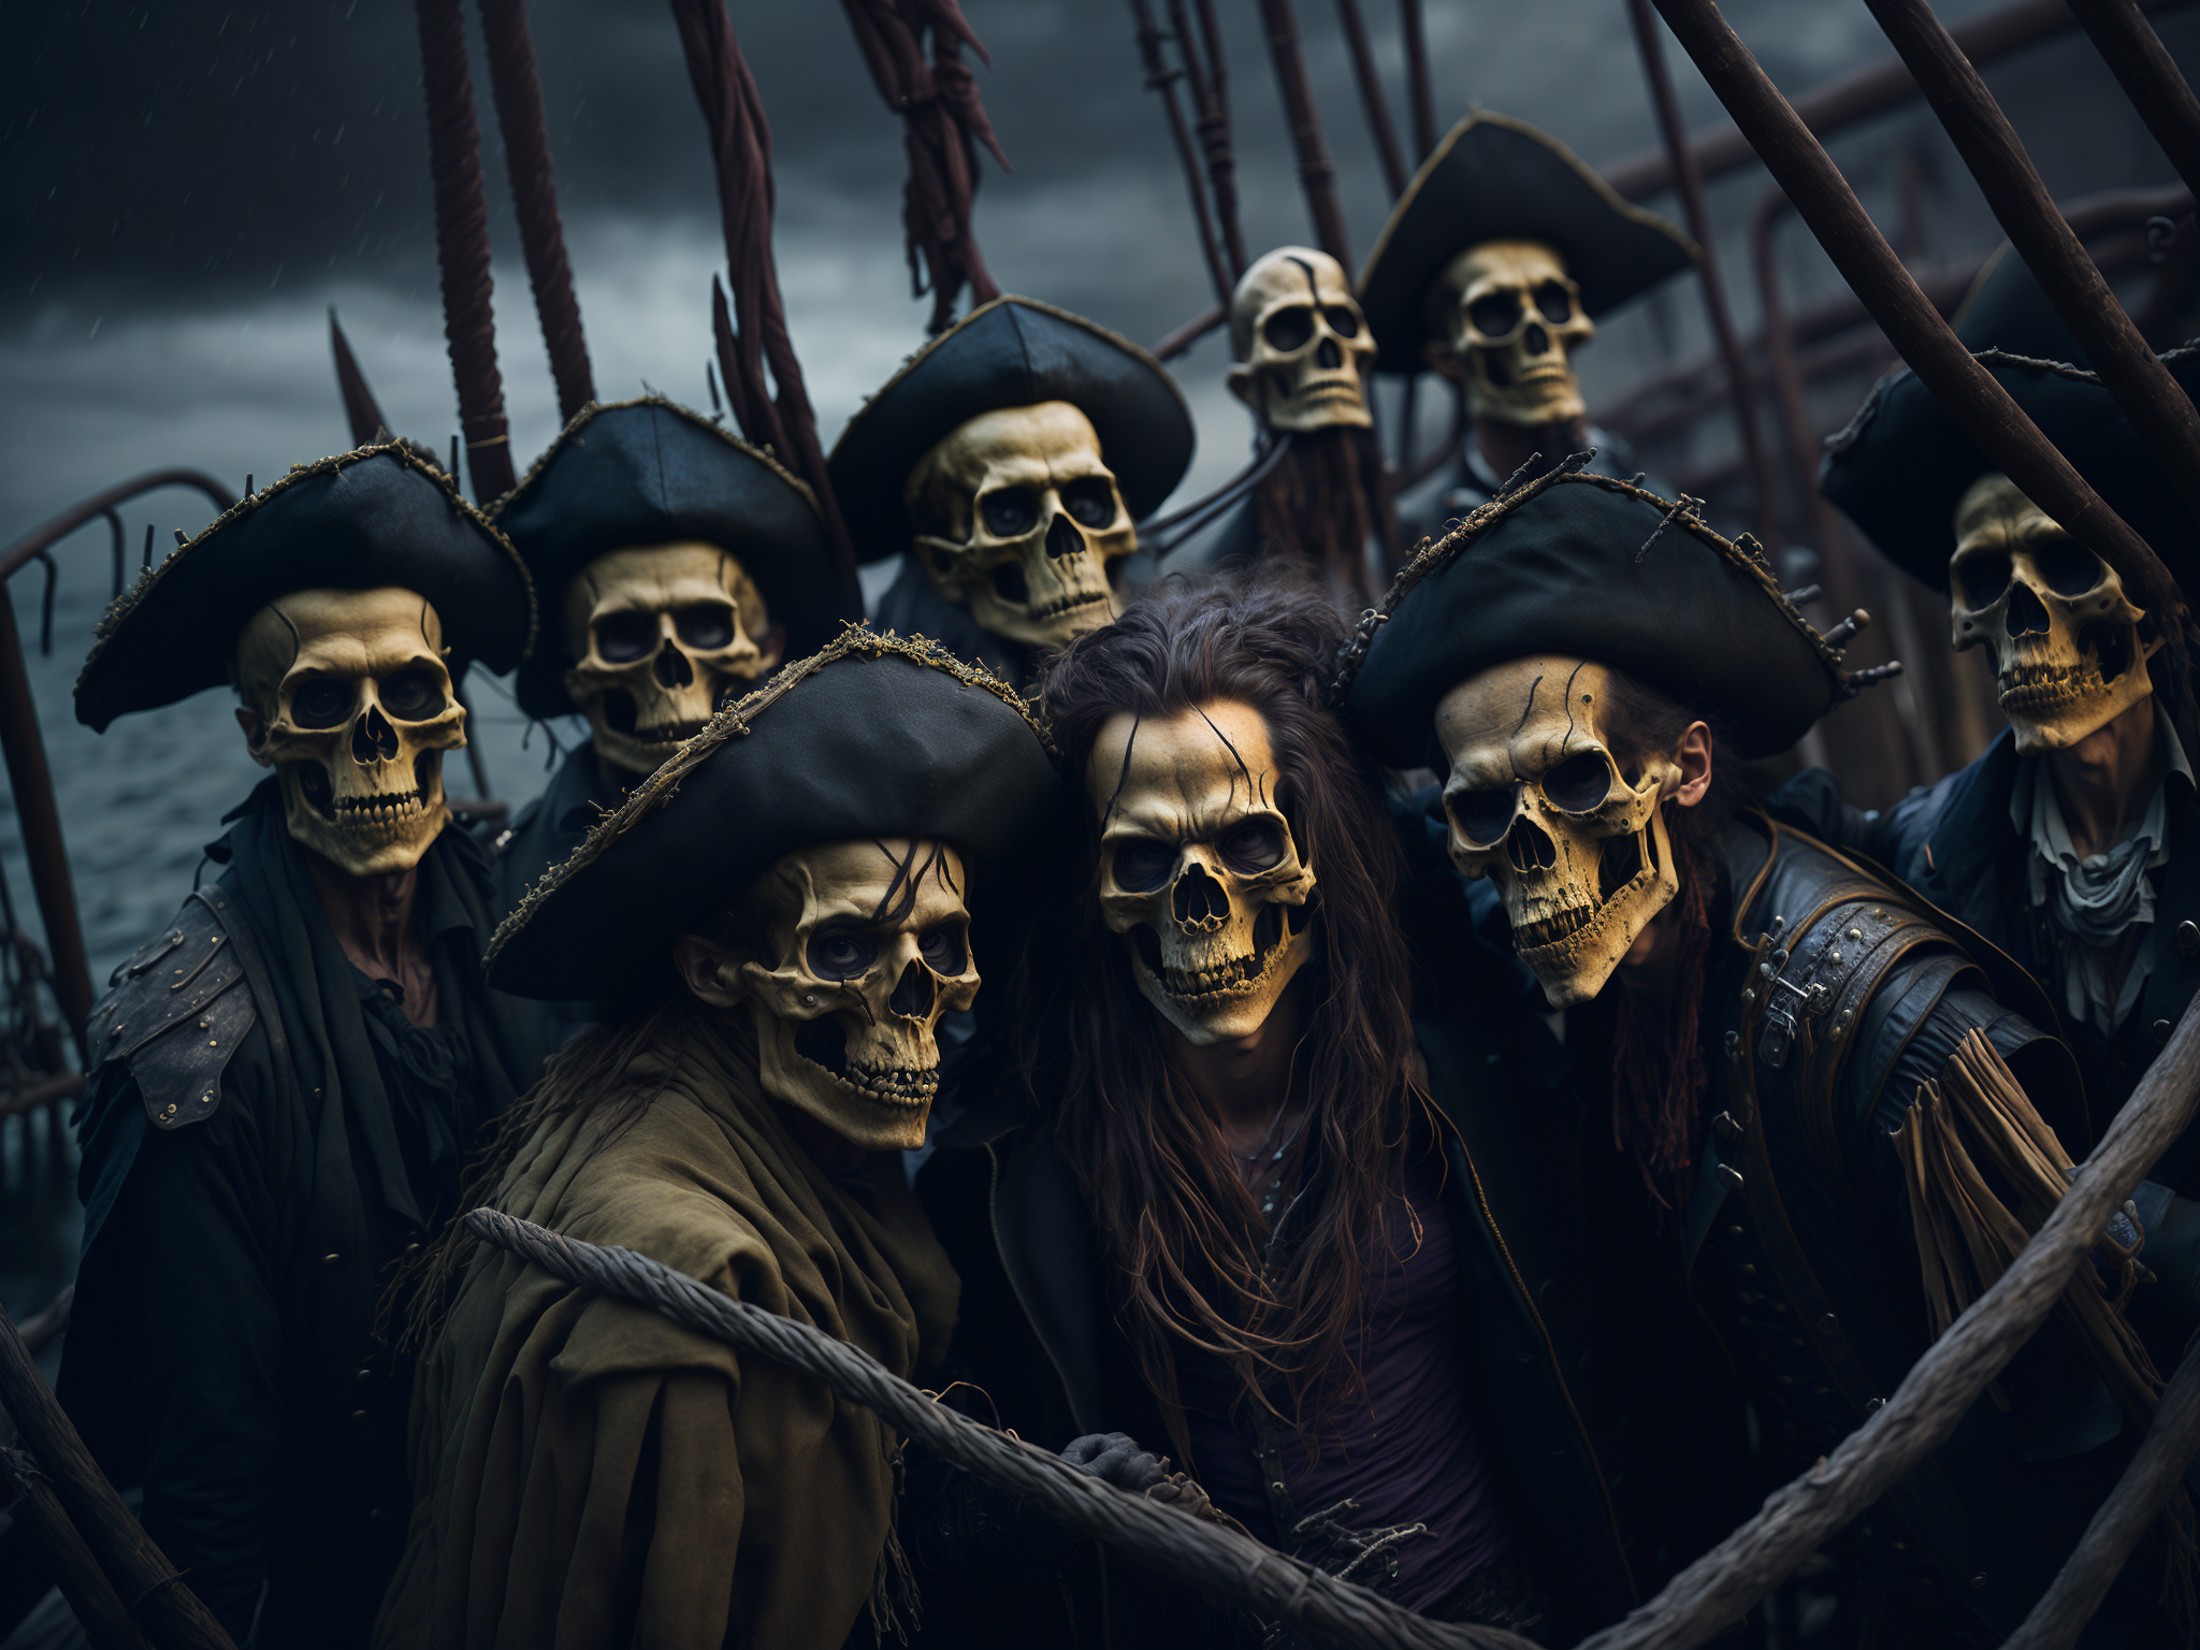 [1800 pirates on a pirate ship taking a selfie:award winning photo of a skeleton pirates on a pirate ship, rainy storm, go...